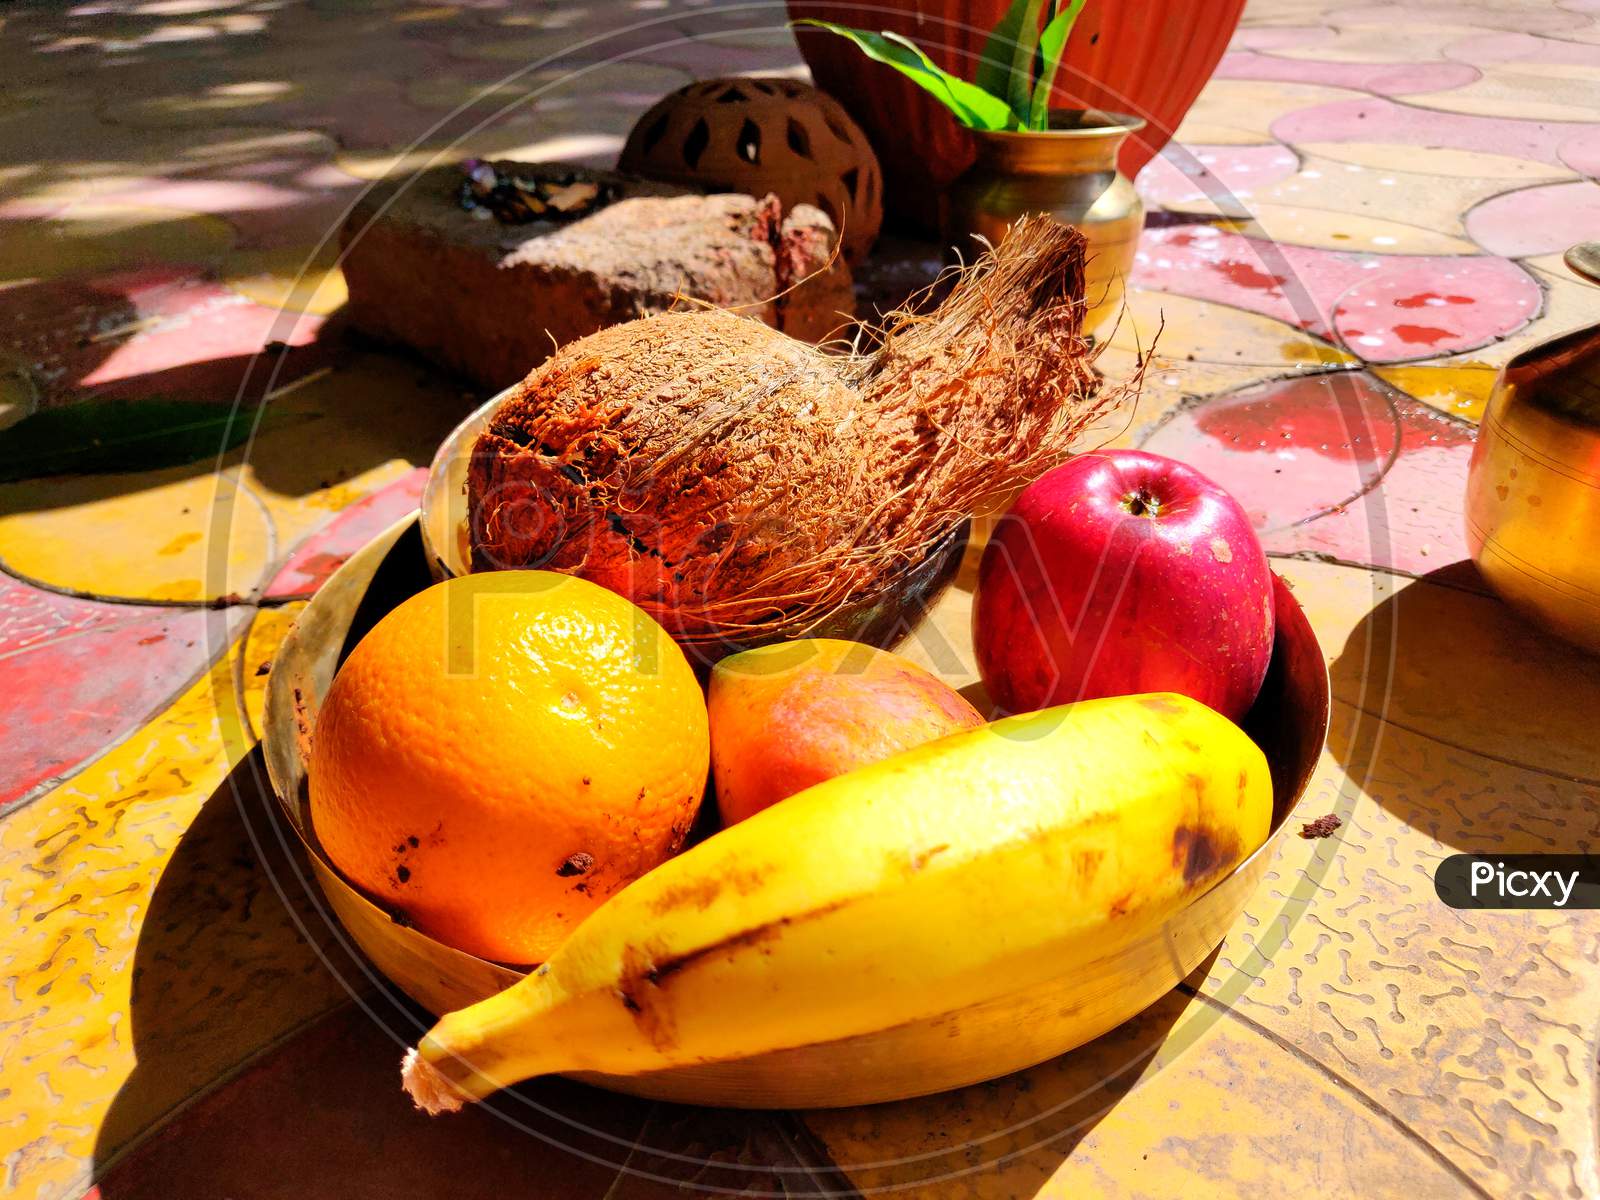 A Fruit Basket Made For Pooja In India